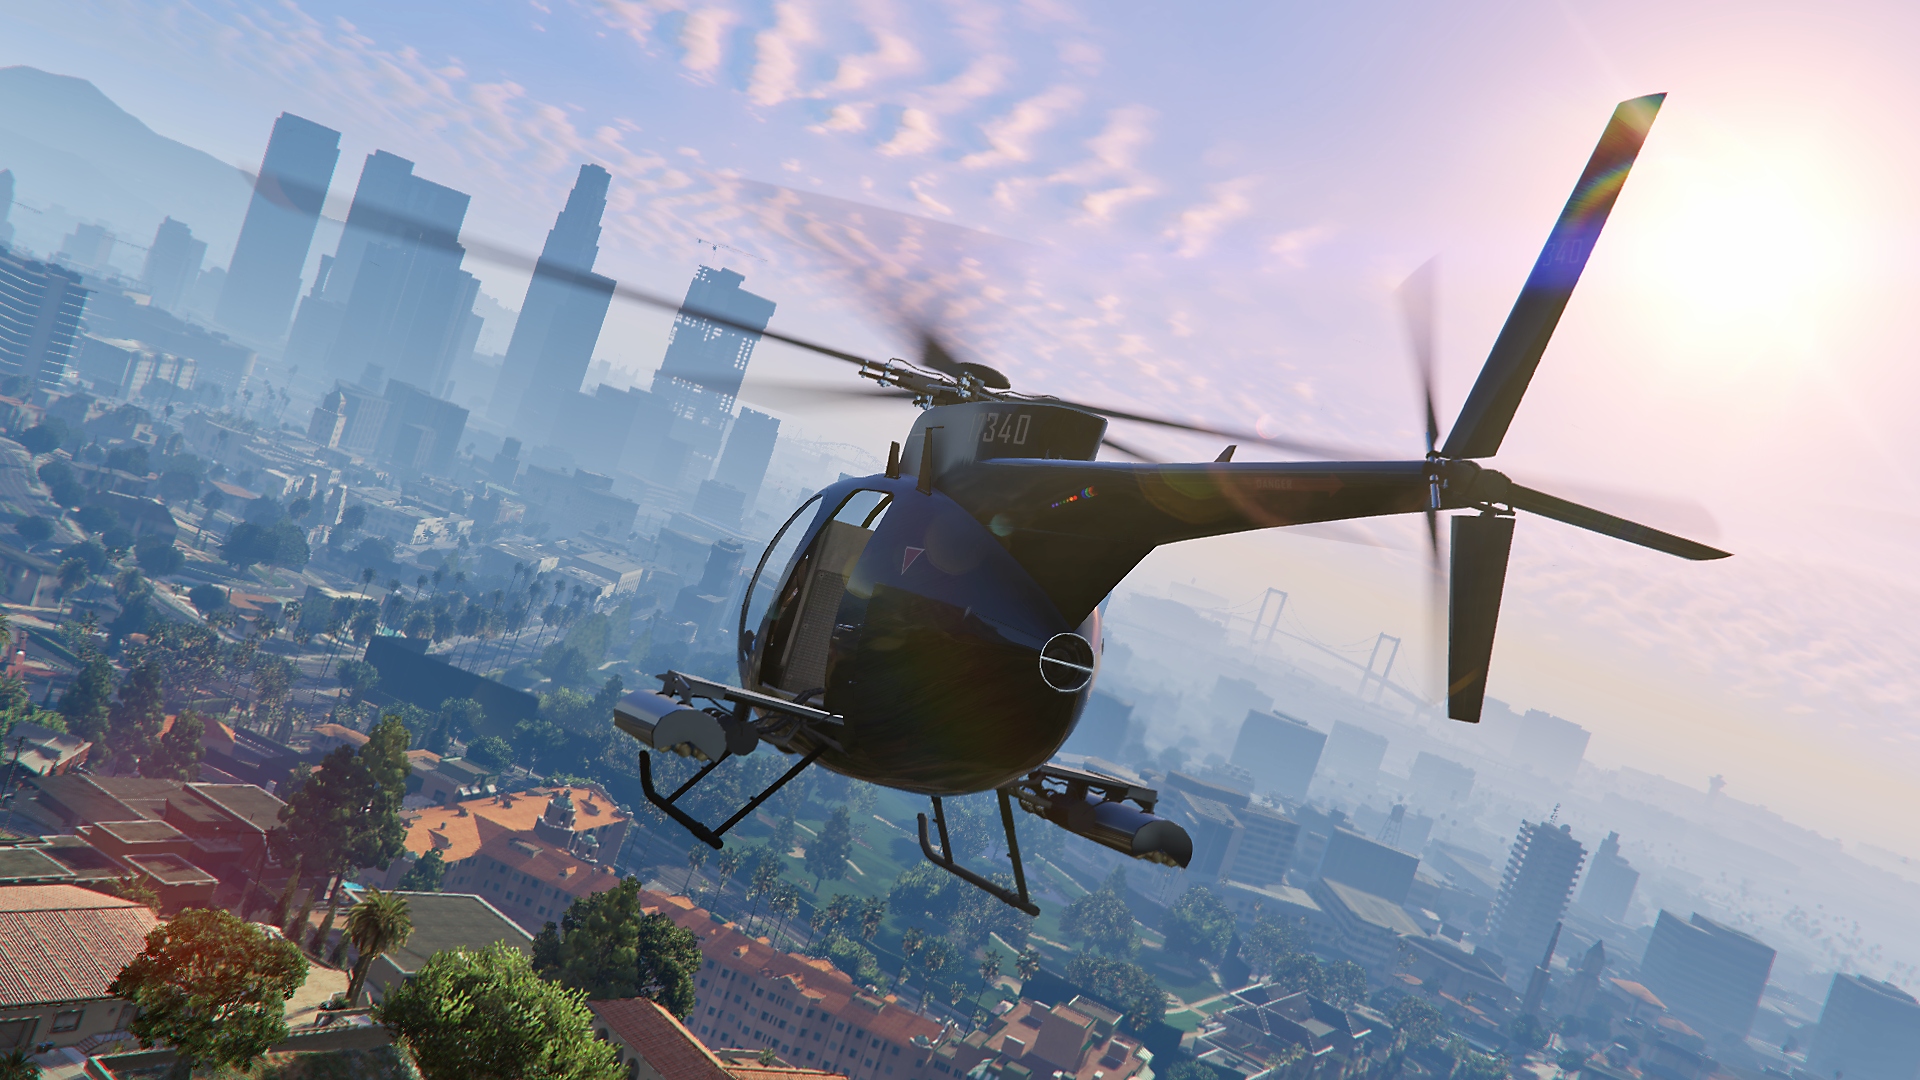 Grand Theft Auto V screenshot showing a helicopter flying with the city skyline in the distance